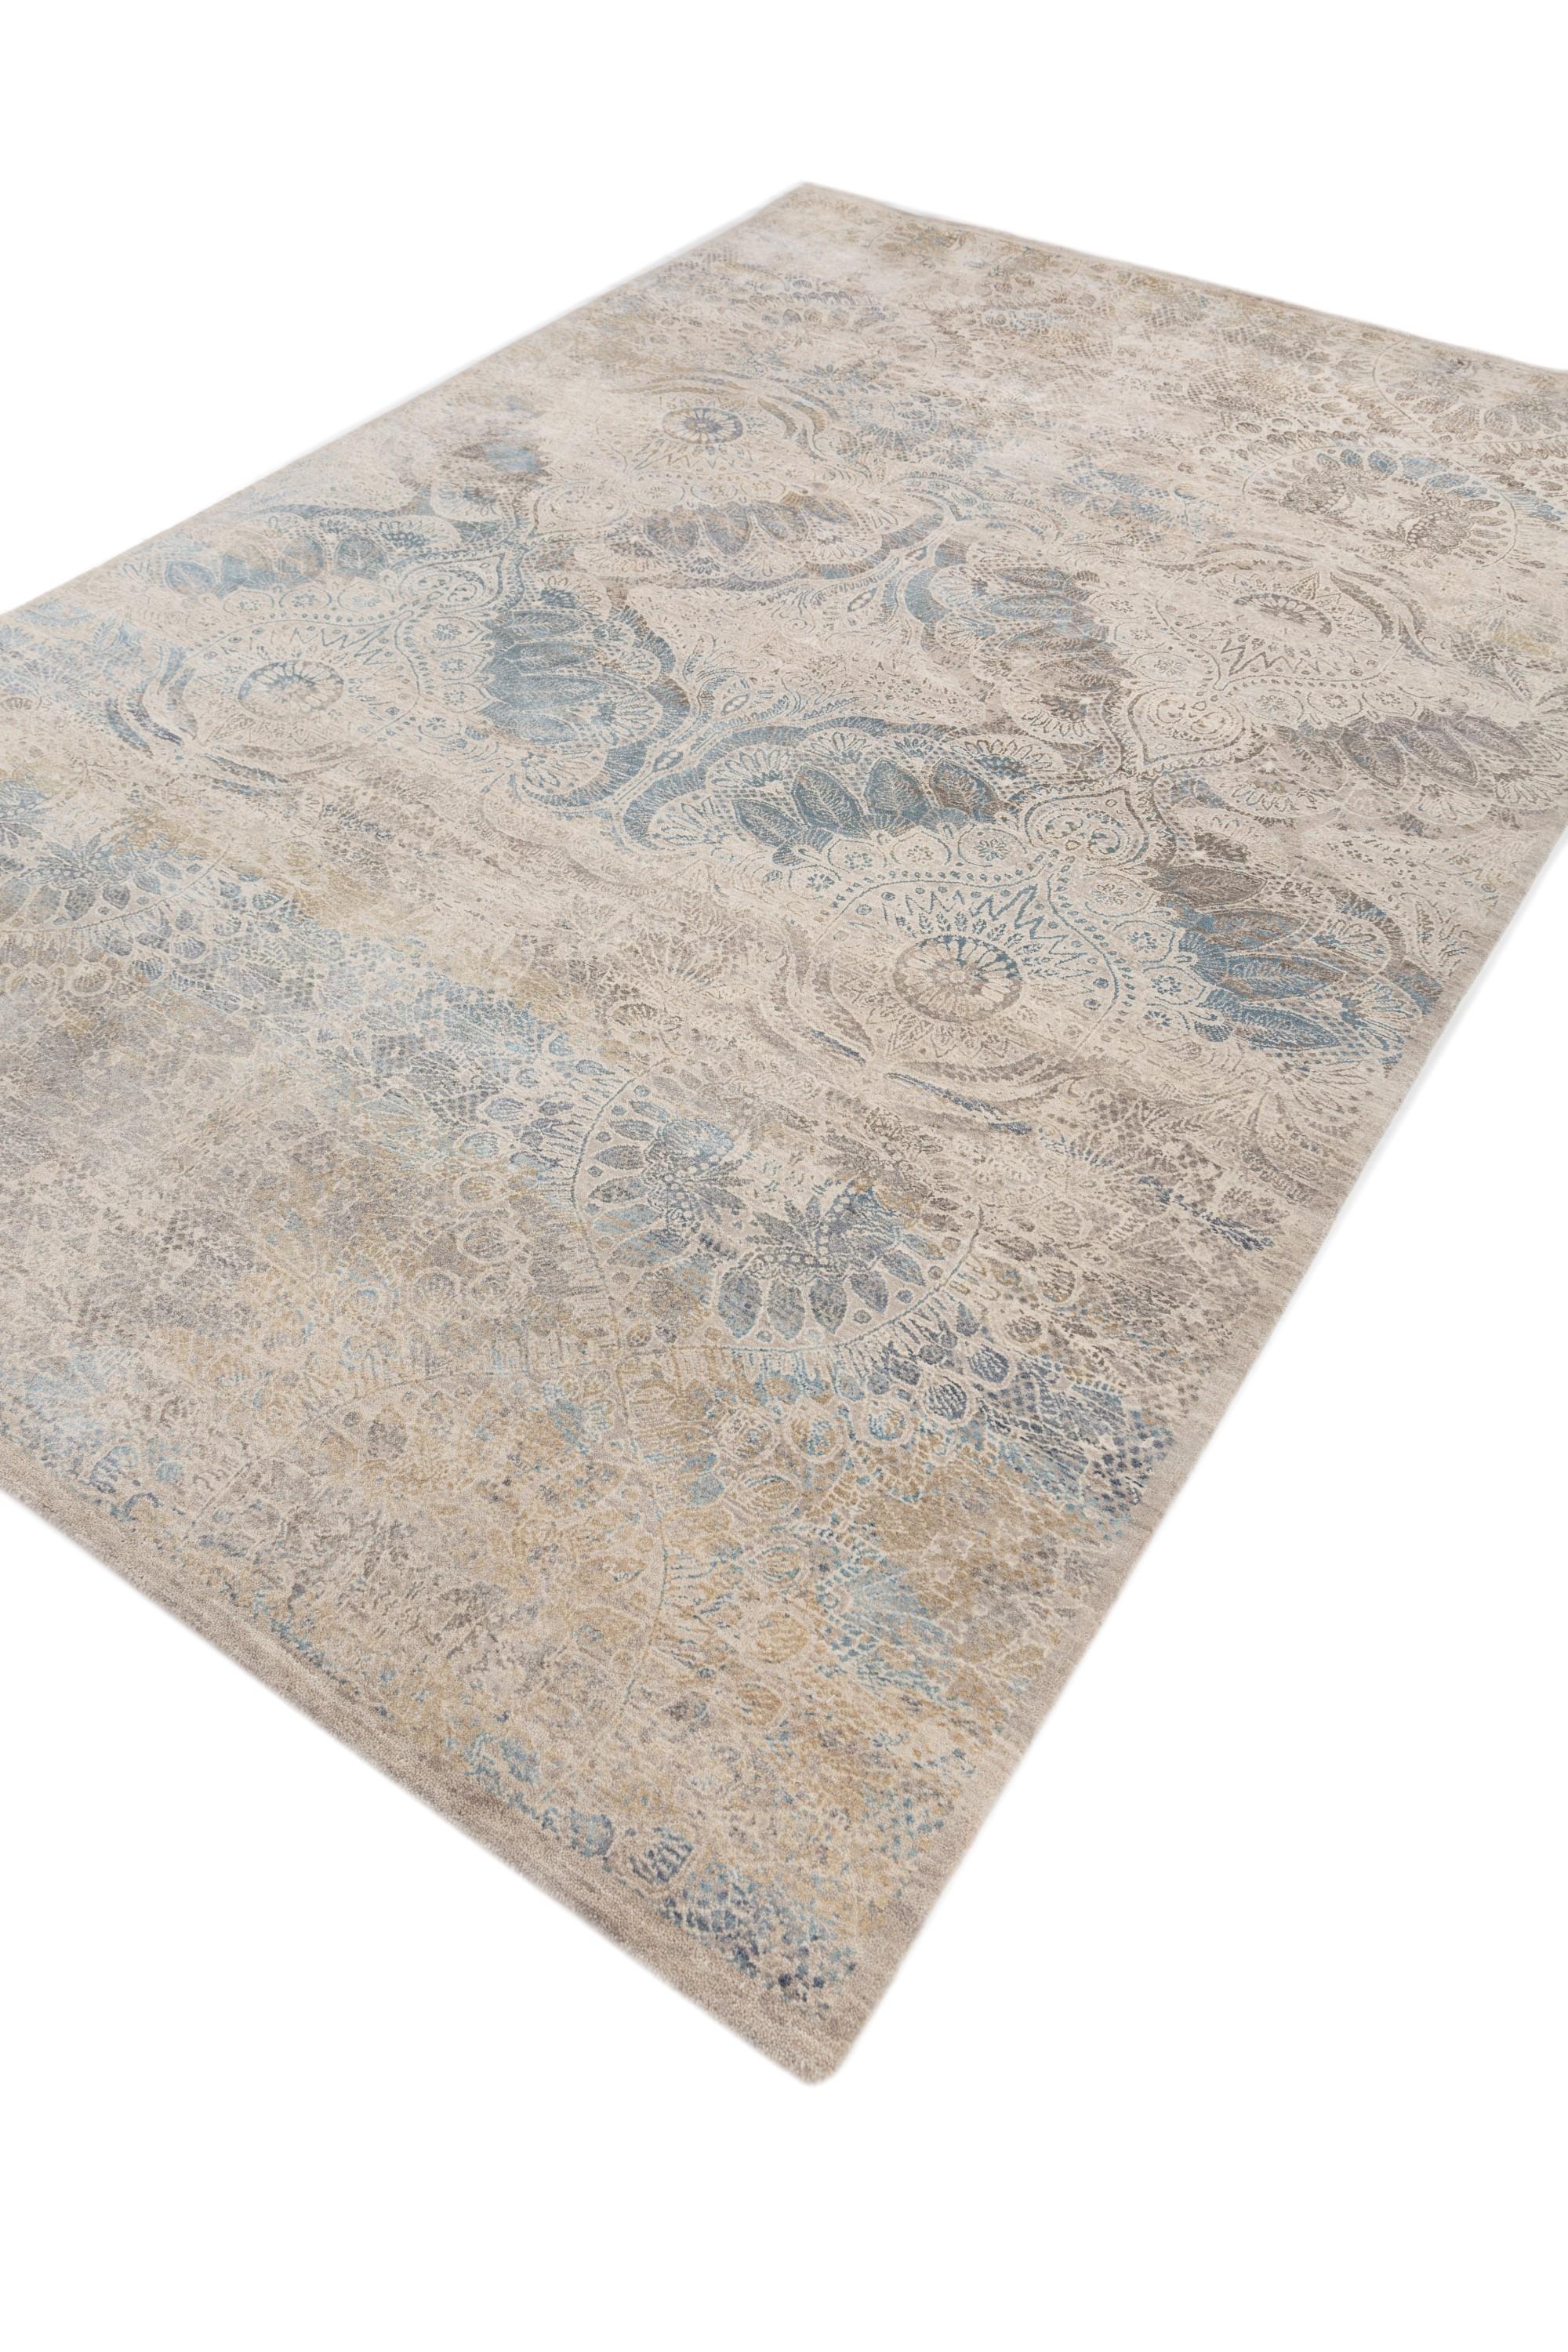 Tibetan Timeless bloom classic gray & linen white 195X295 cm handknotted rug For Sale